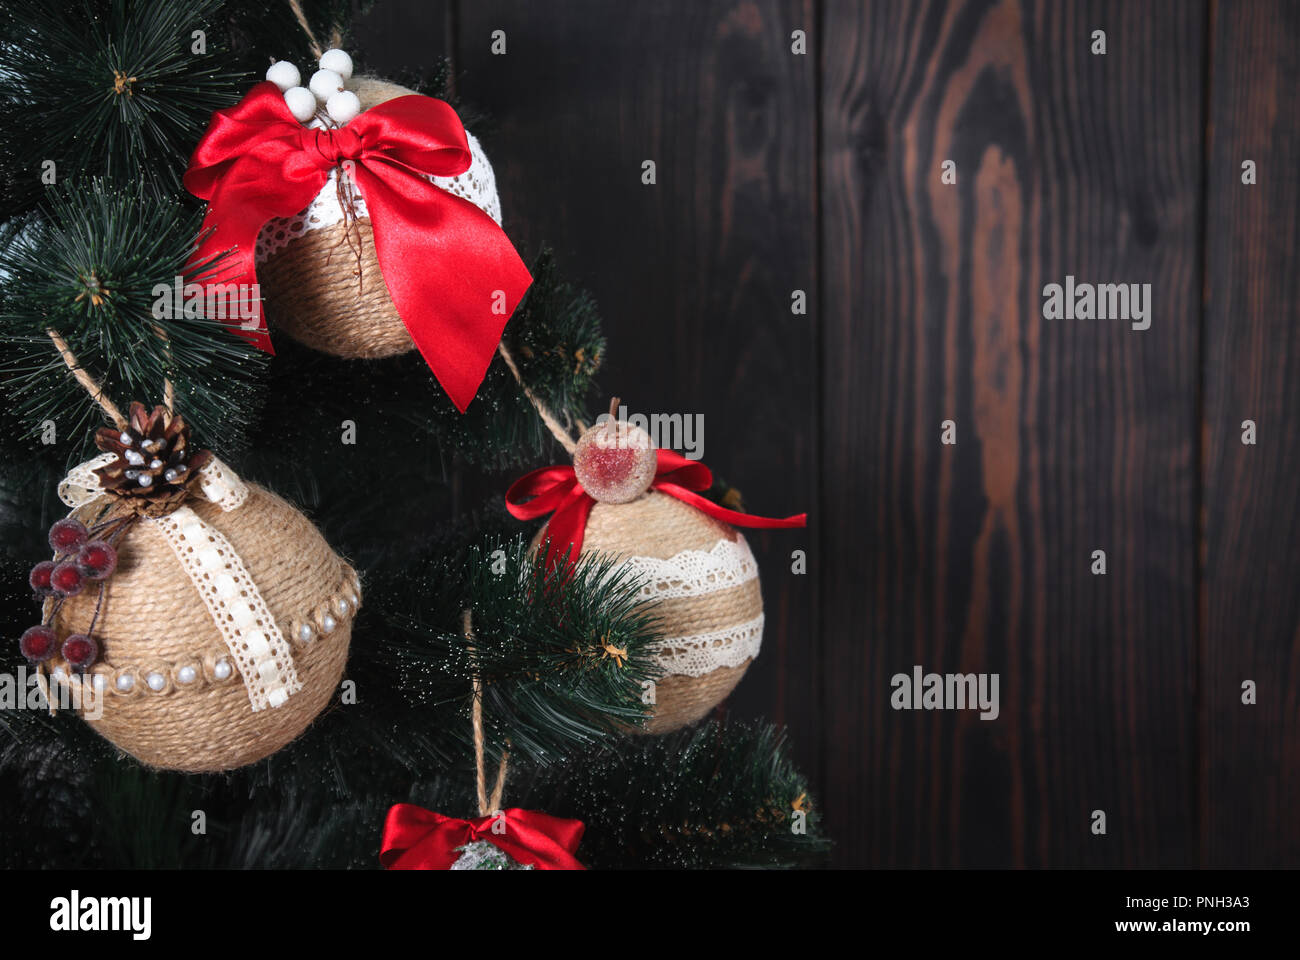 Christmas or New Year rustic wooden background with toy decorations and fur tree branch, copy space. Stock Photo